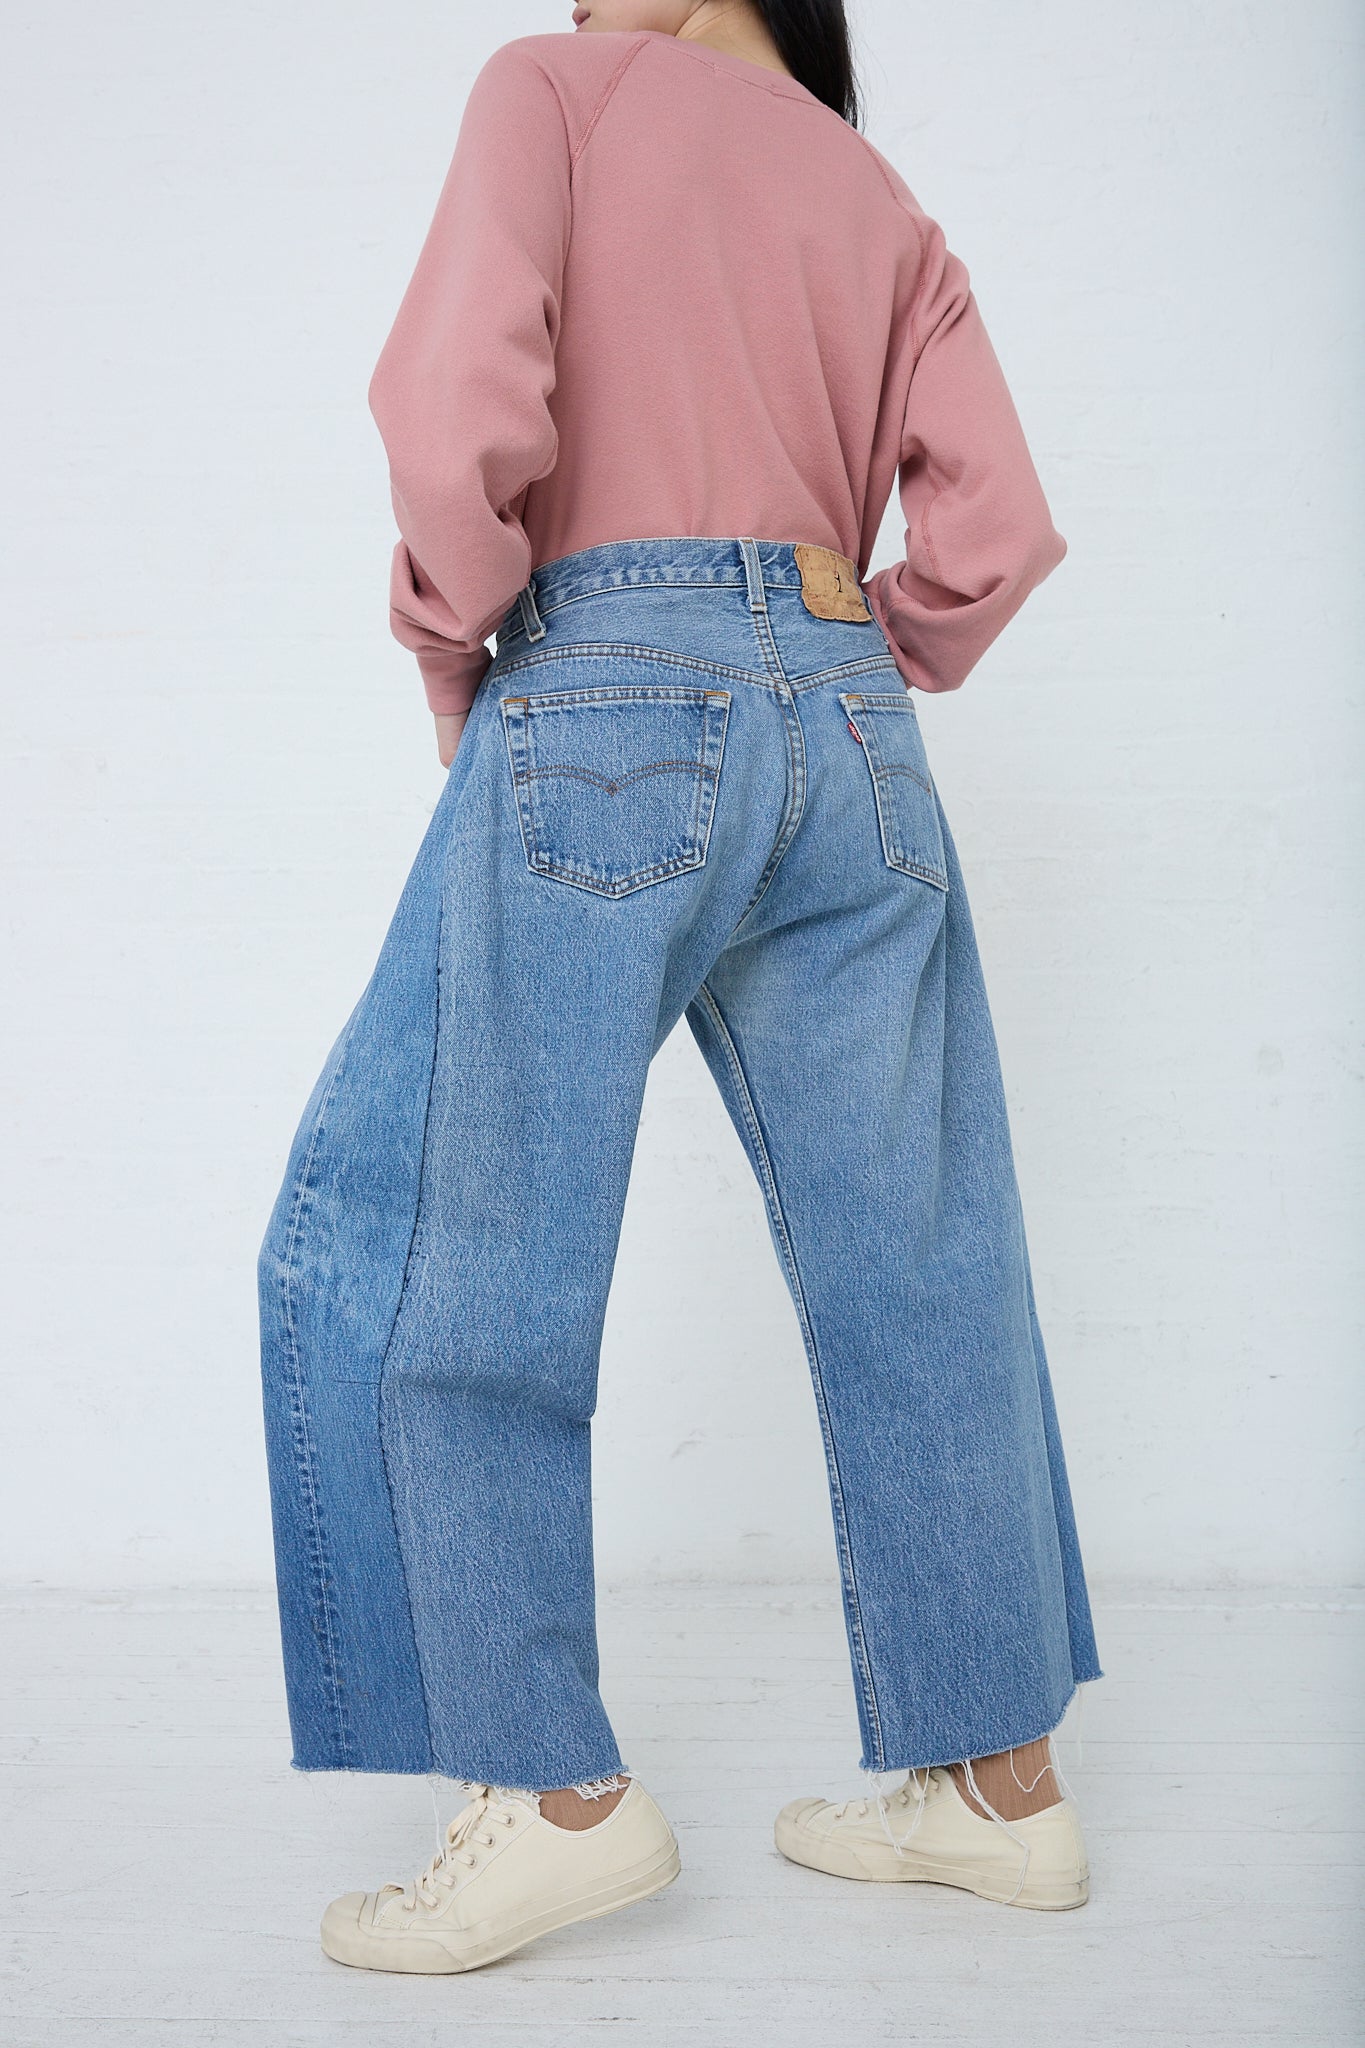 A woman in a pink sweater and B Sides Lasso Jean in Vintage Indigo looks stylish and comfortable. Back view.